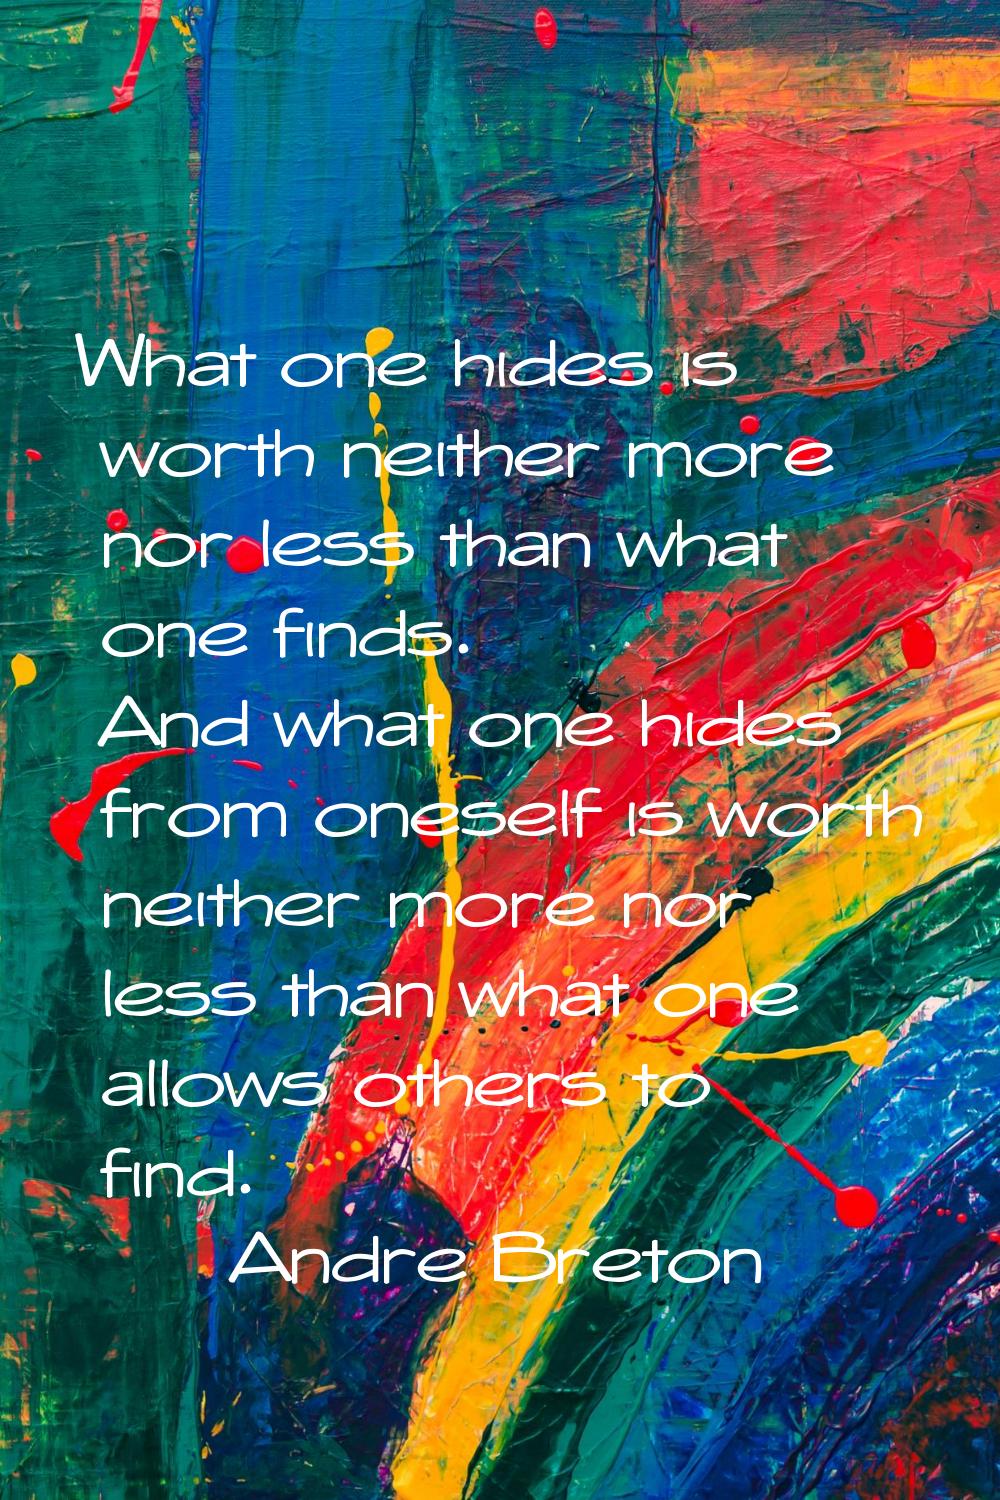 What one hides is worth neither more nor less than what one finds. And what one hides from oneself 